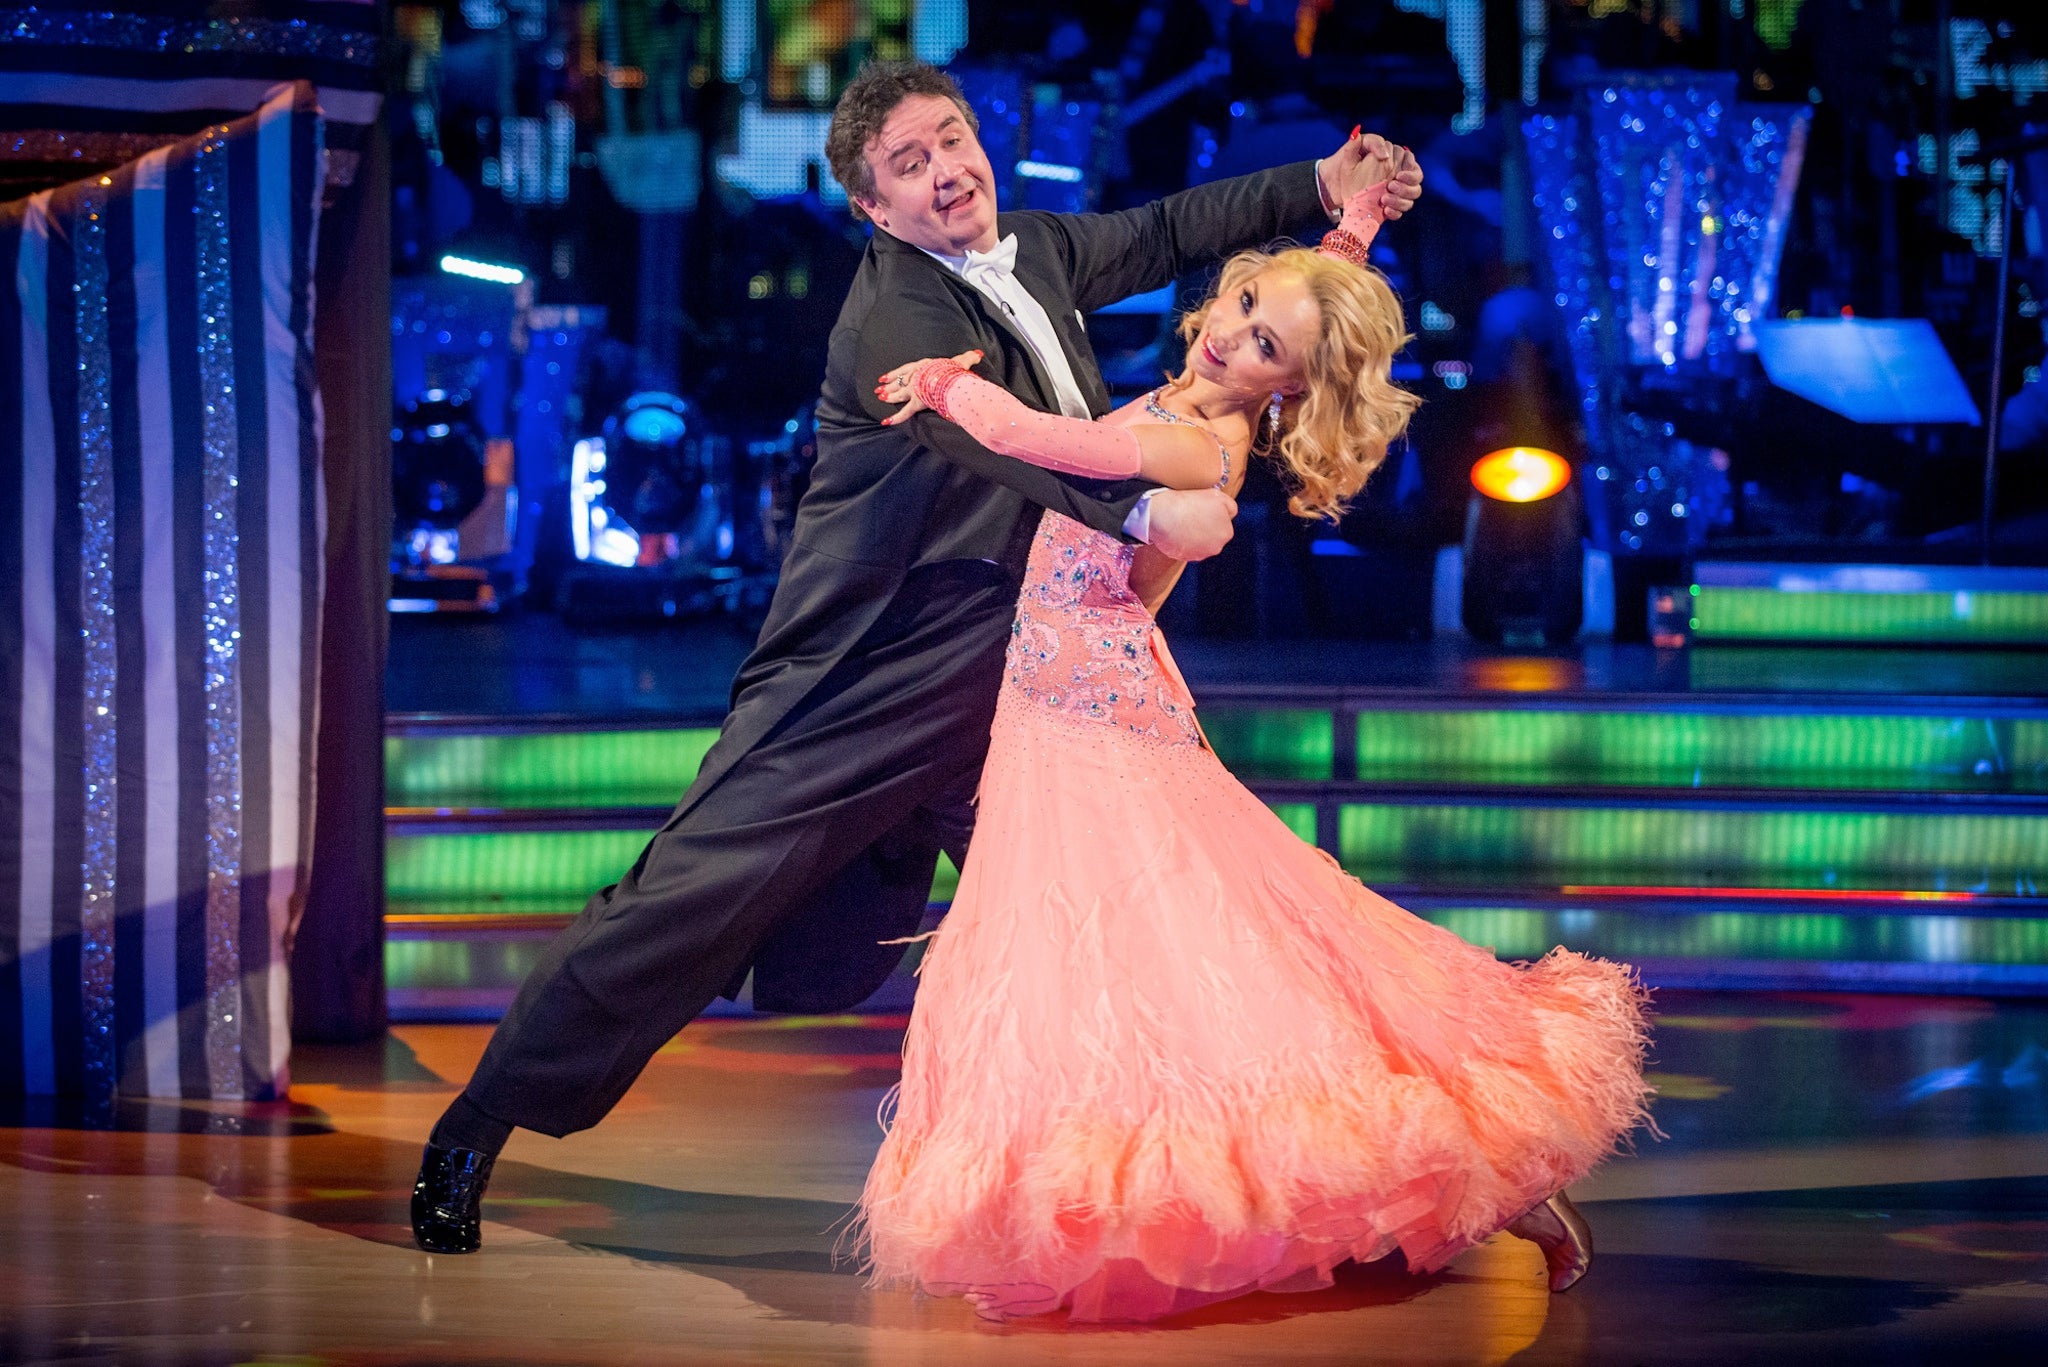 Mark and Iveta stepped up their game to stay in the competition